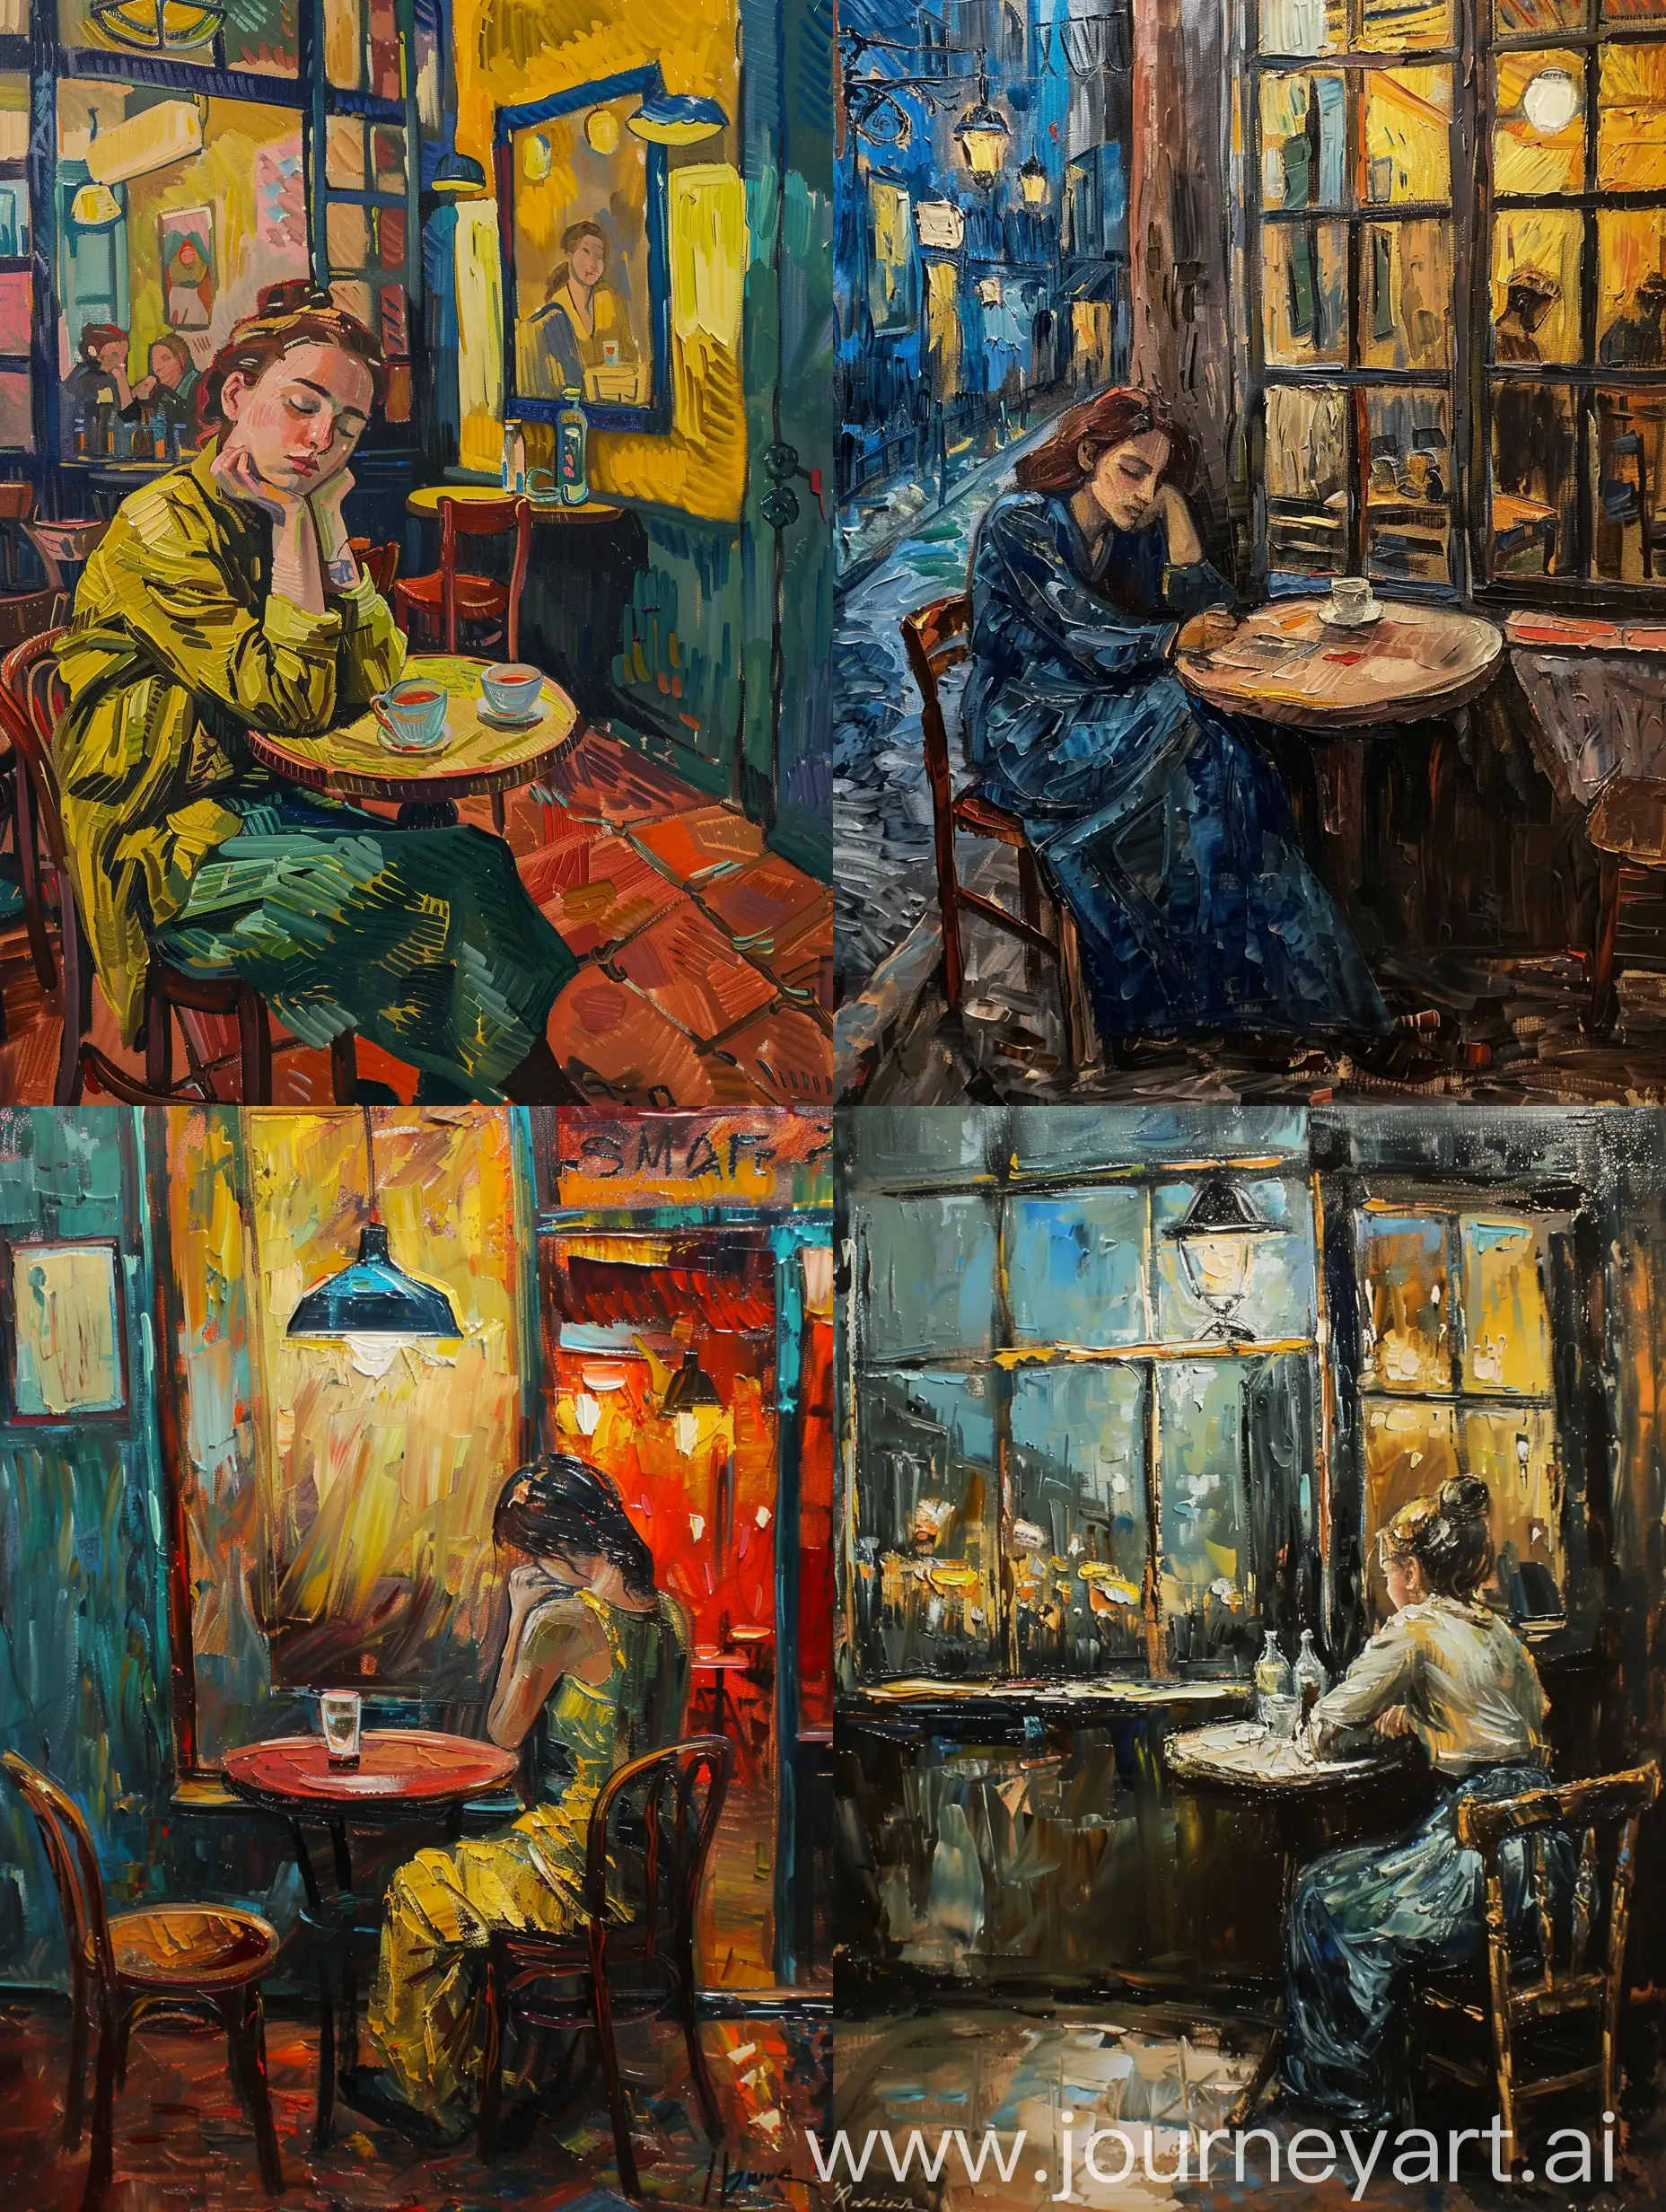 Realistic-Genre-Oil-Painting-of-a-Woman-in-Cafe-Van-Gogh-Style